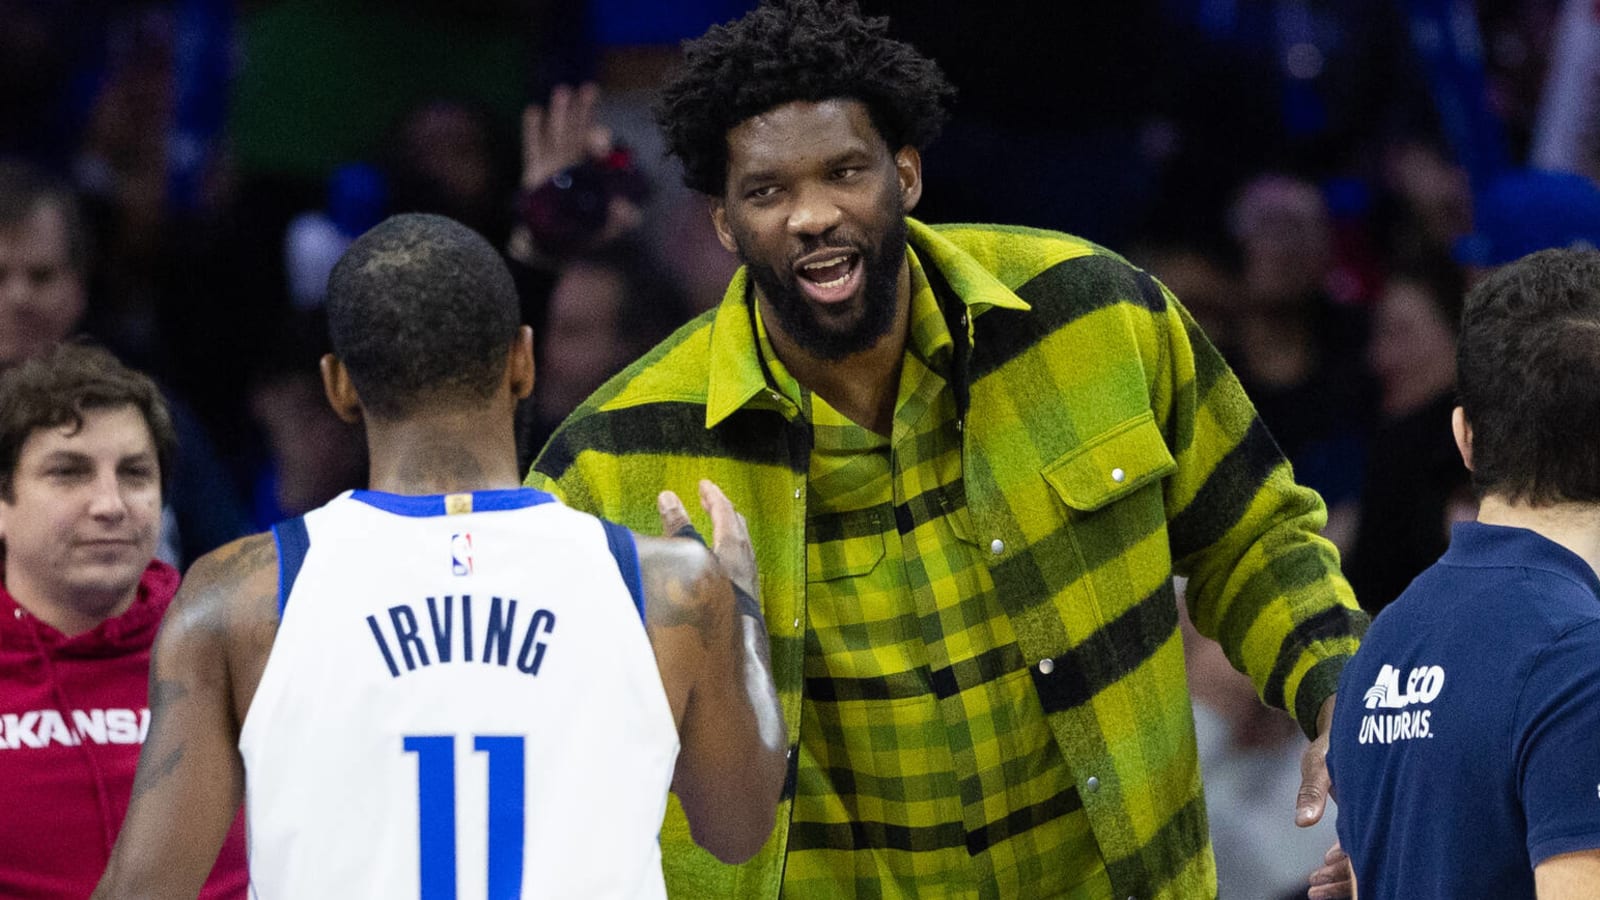 Joel Embiid's Future Uncertain: Inside the Sixers' Struggle and Trade Buzz